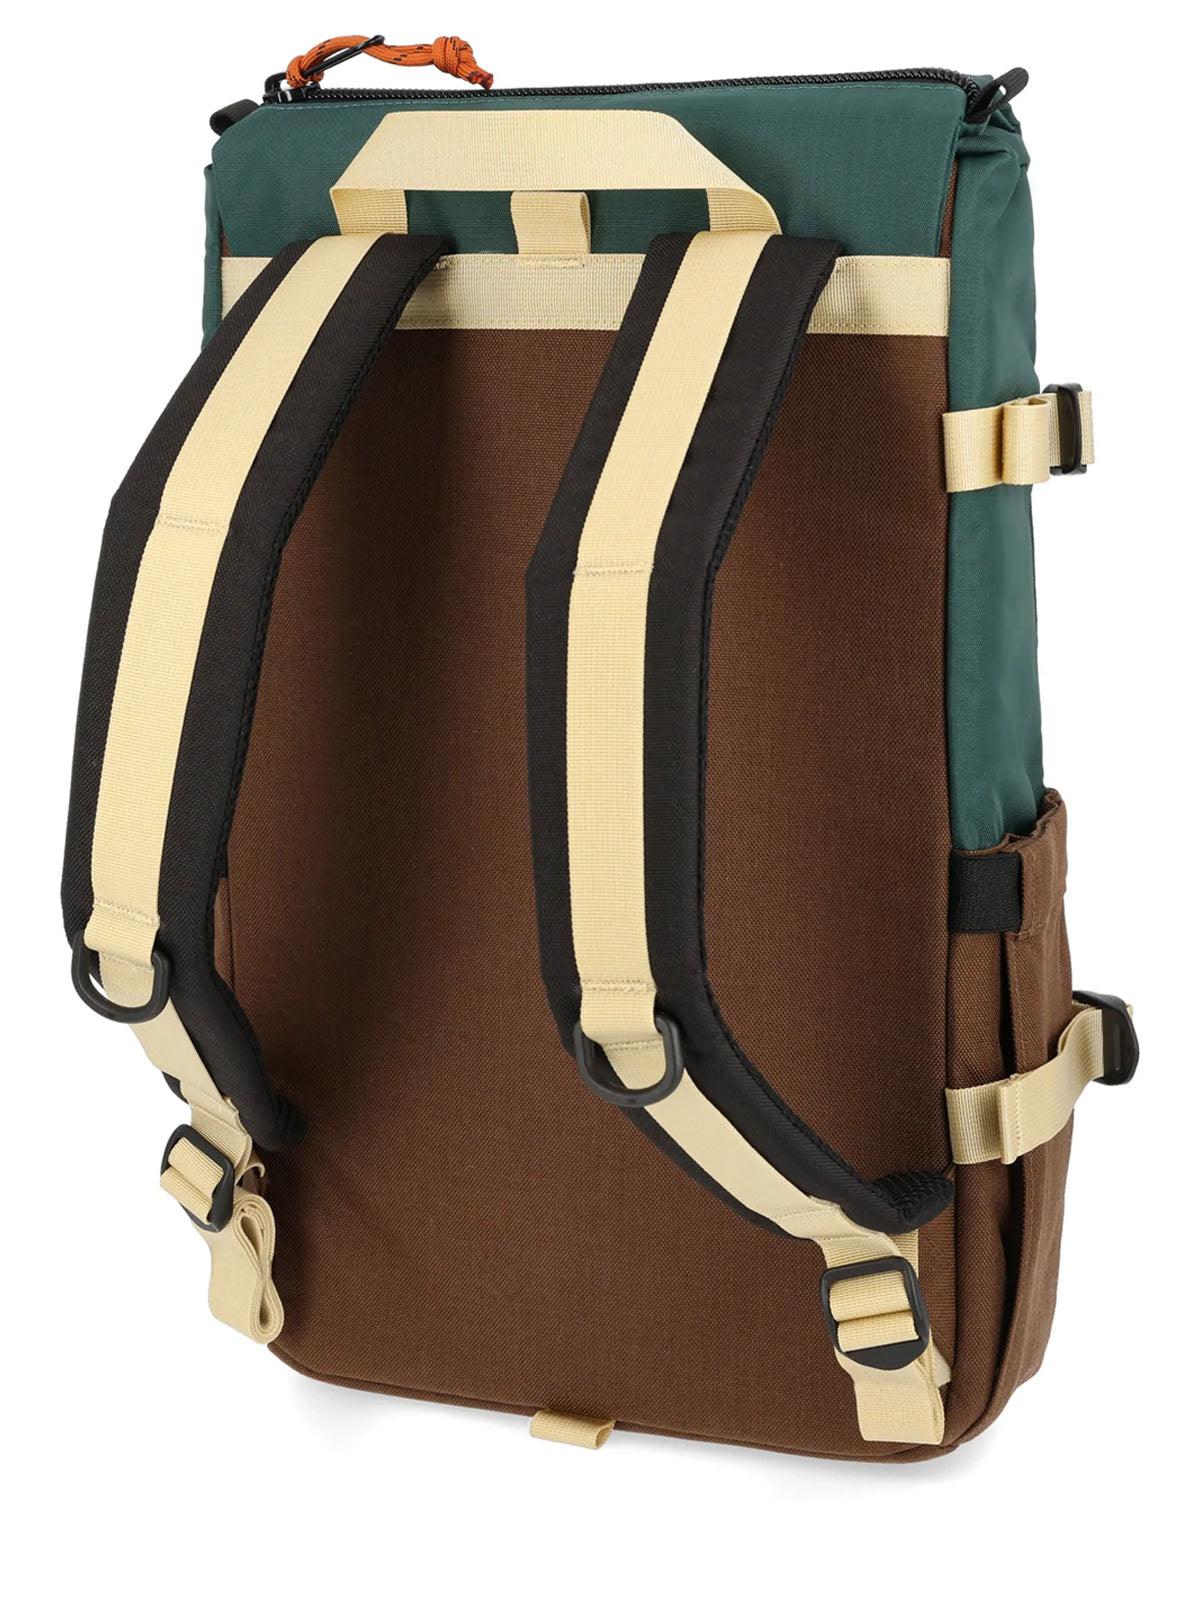 Topo Designs Rover Pack Forest Cocoa